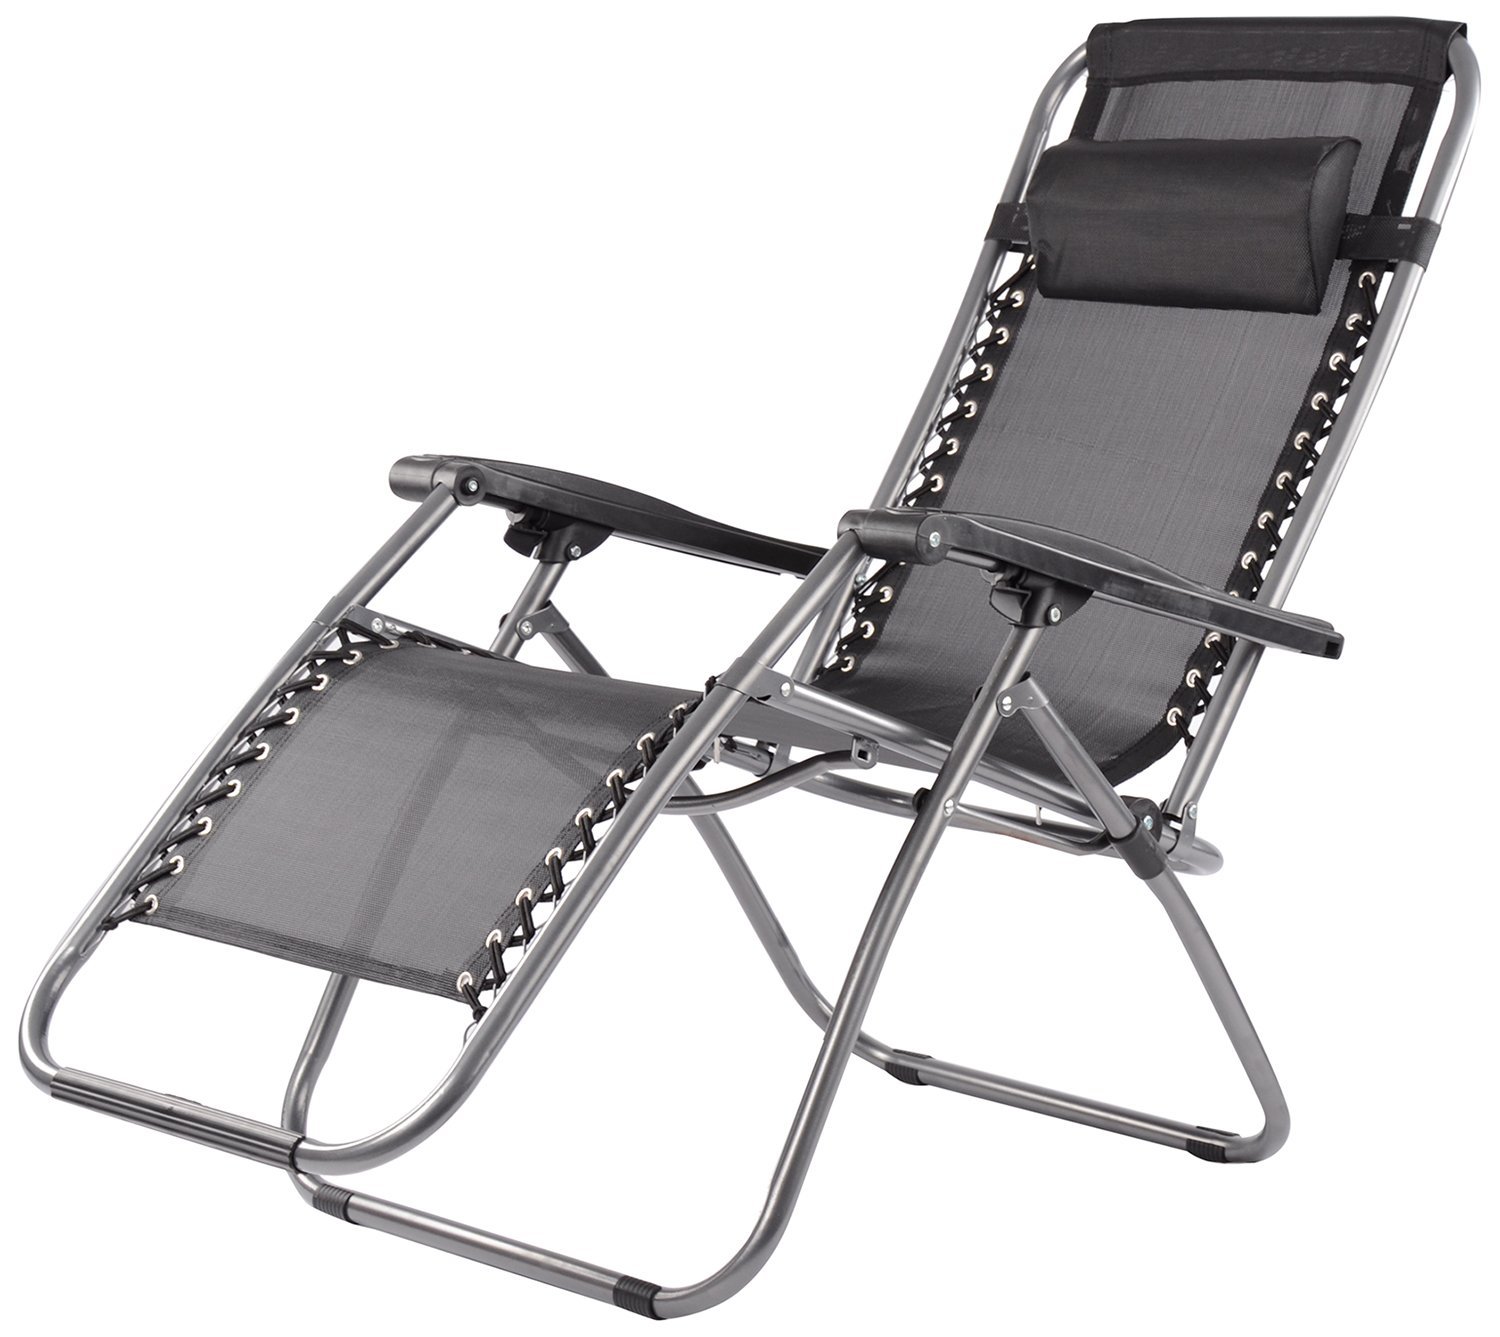 Elite Zero Gravity Relax Recliner Folding Chair Black available at